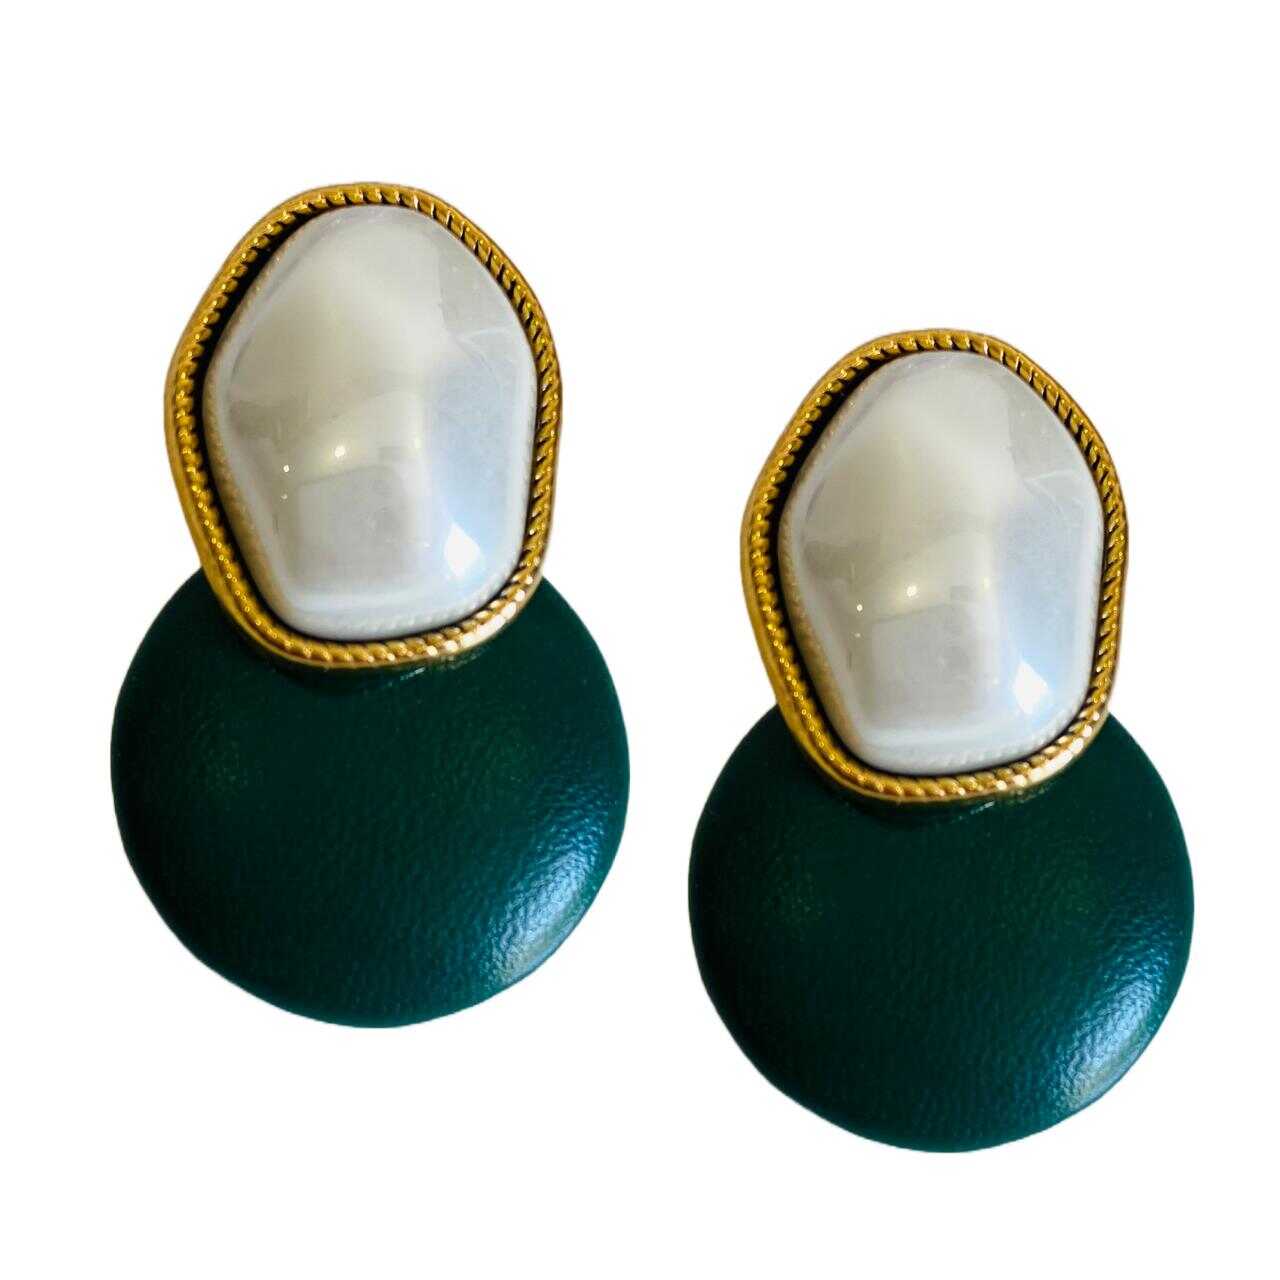 Big Pearl Earrings | Fashion Jewellery | Lifetime Replacement Warranty | Premium Quality